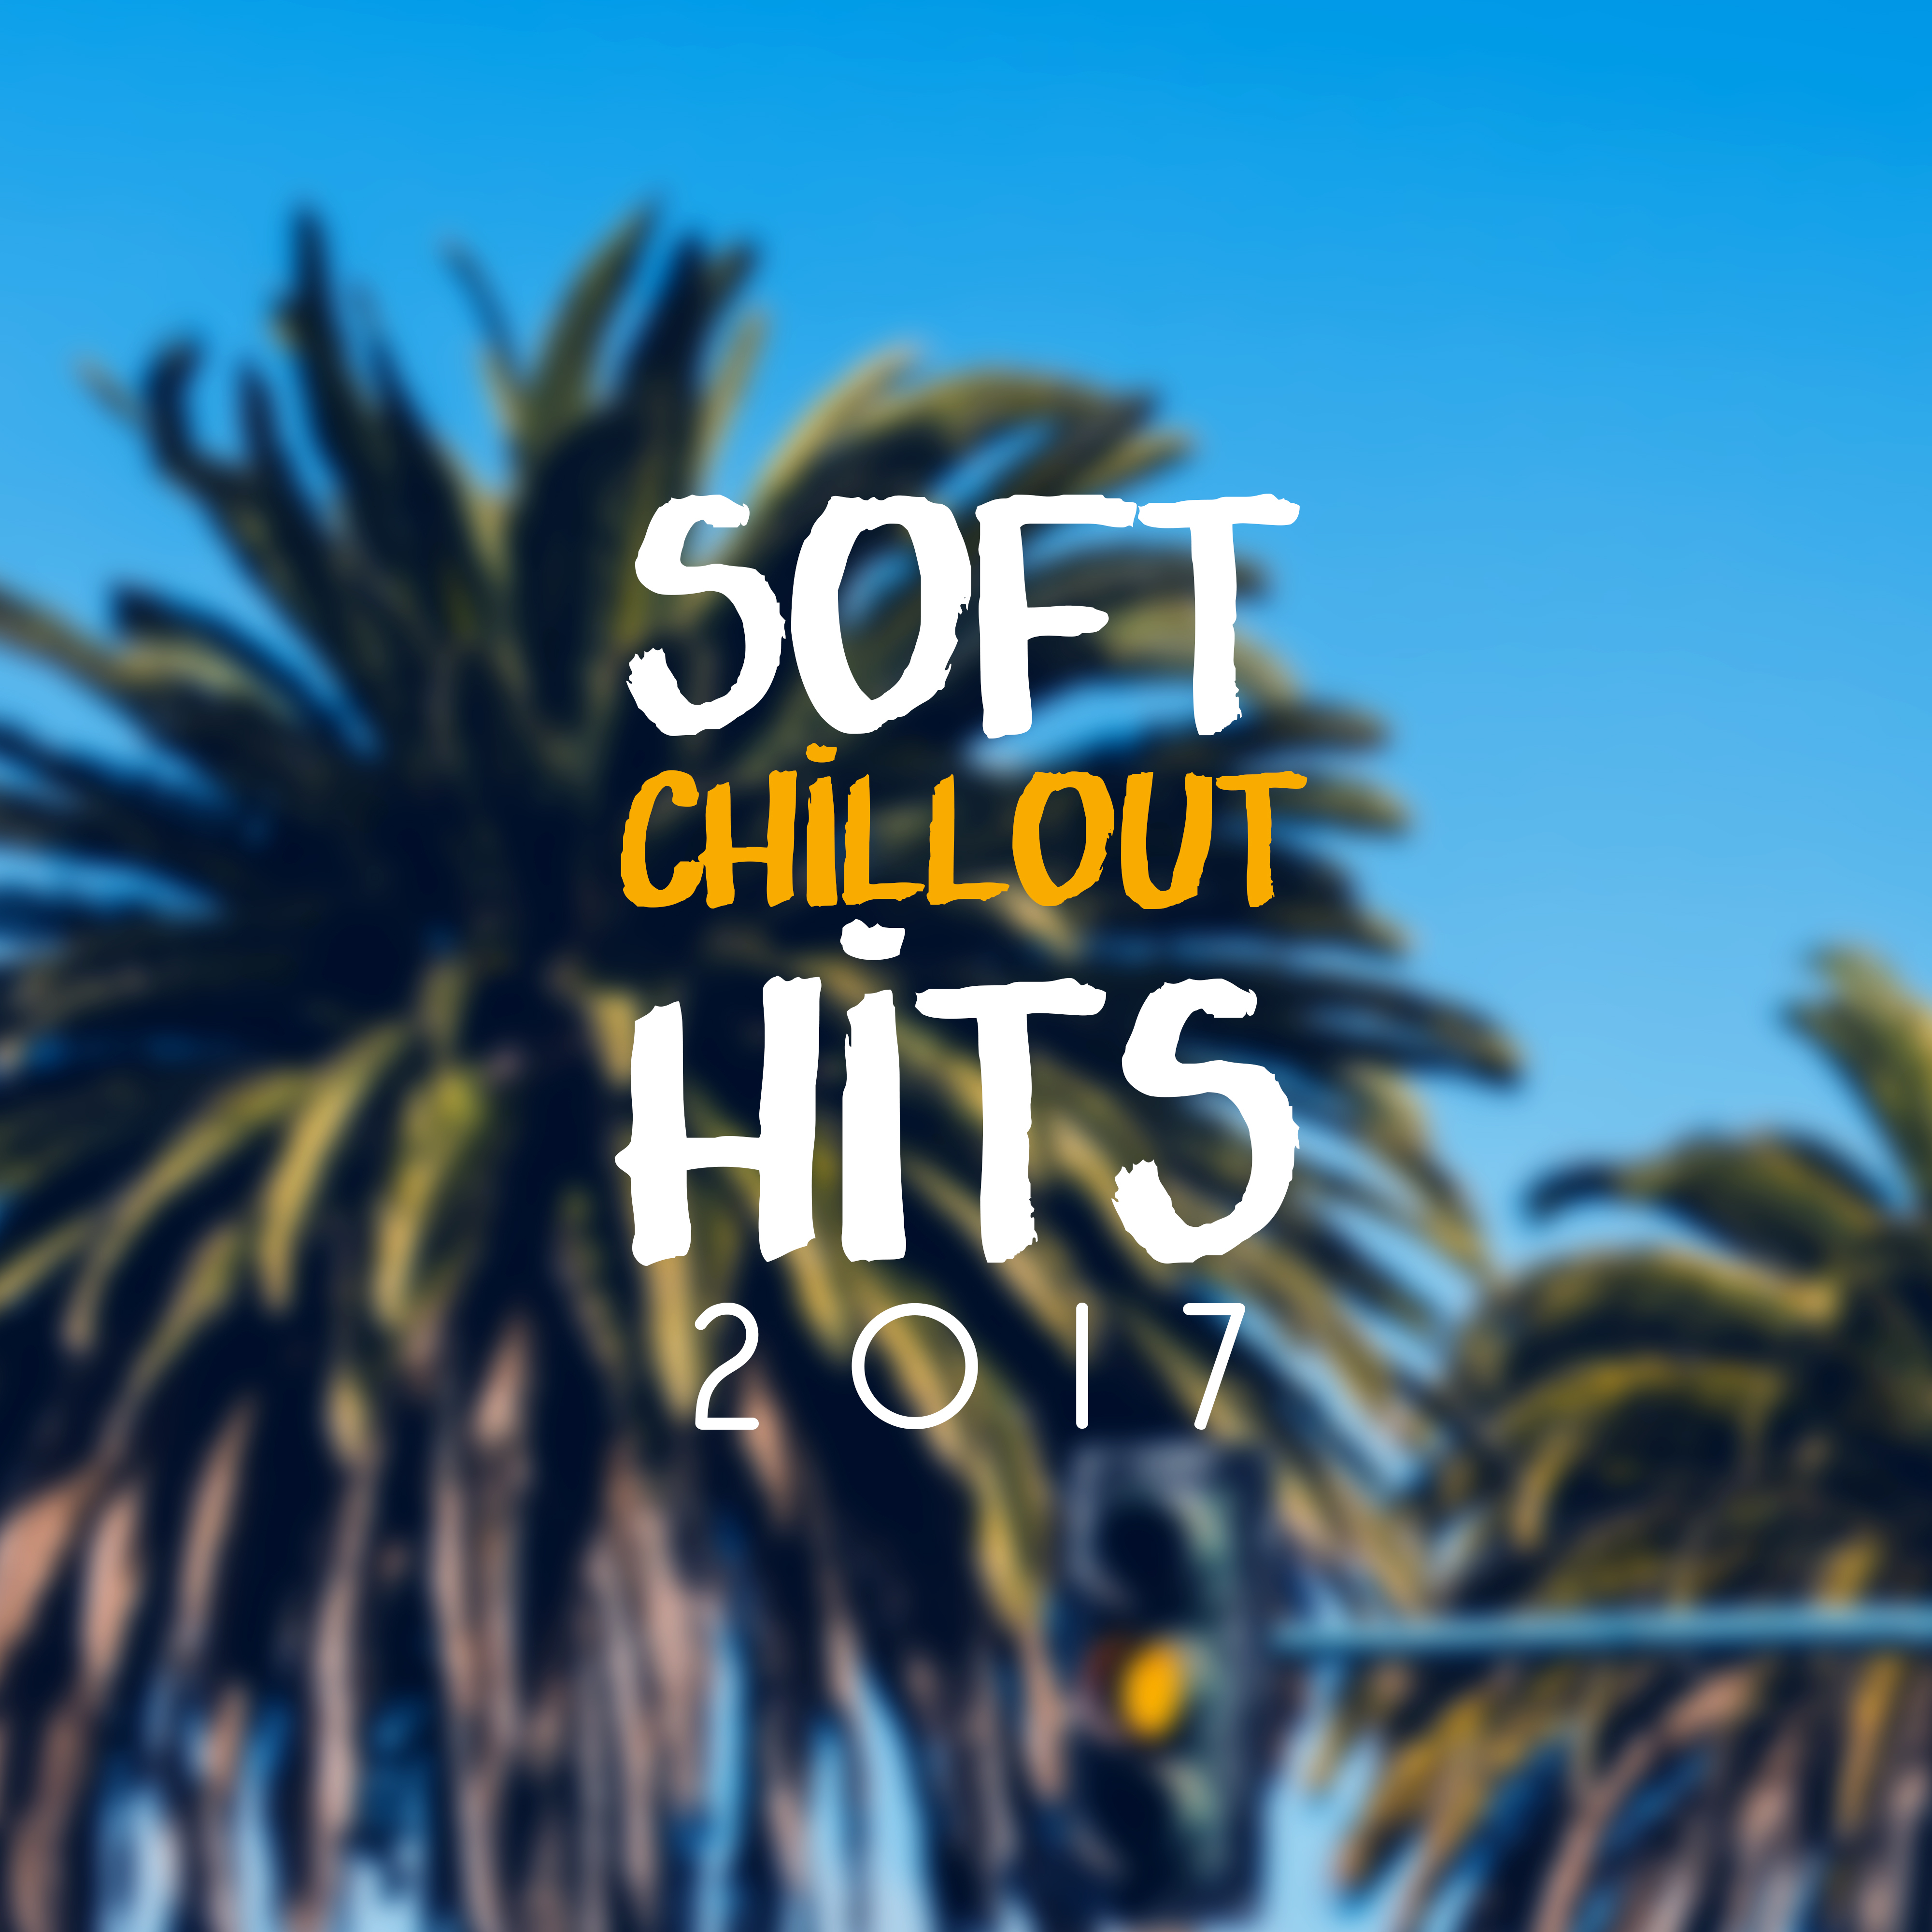 Soft Chillout Hits 2017 – Sensual Vibes, Relaxing Music, Chill Out 2017, Ambient Lounge